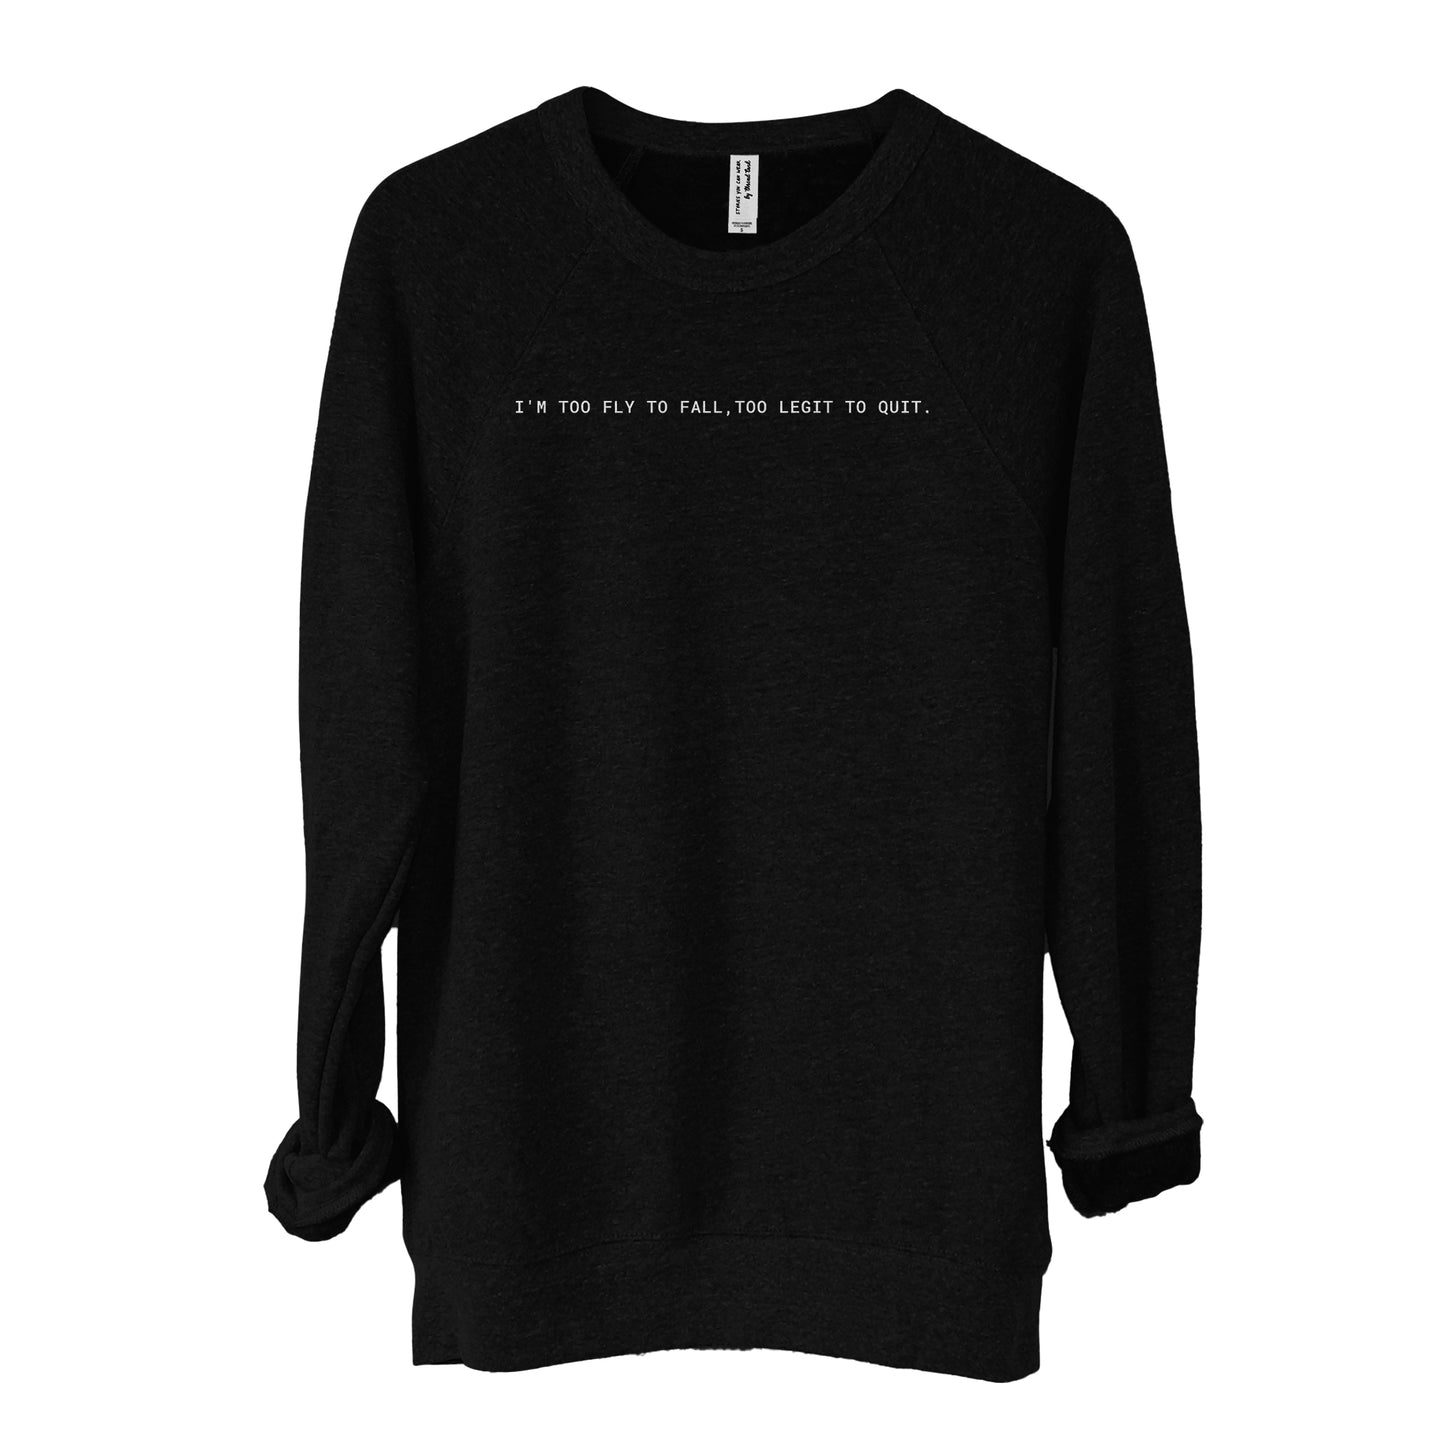 I'm too fly to fall,too legit to quit Fleece Sweater Heather Solid Black Image